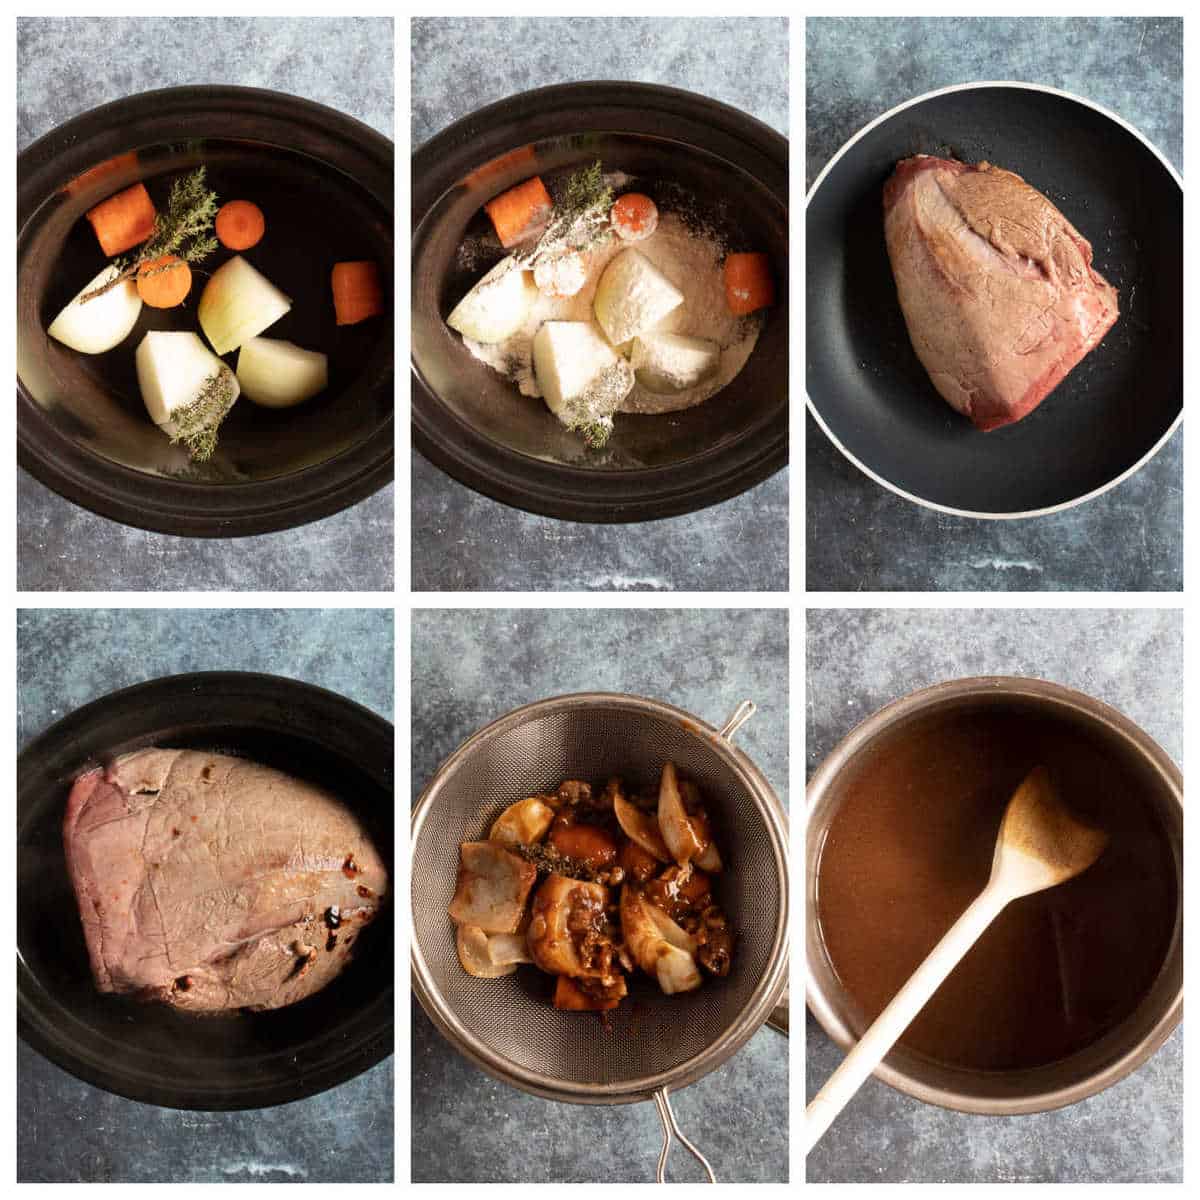 How to make slow cooker roast beef in 6 easy steps.